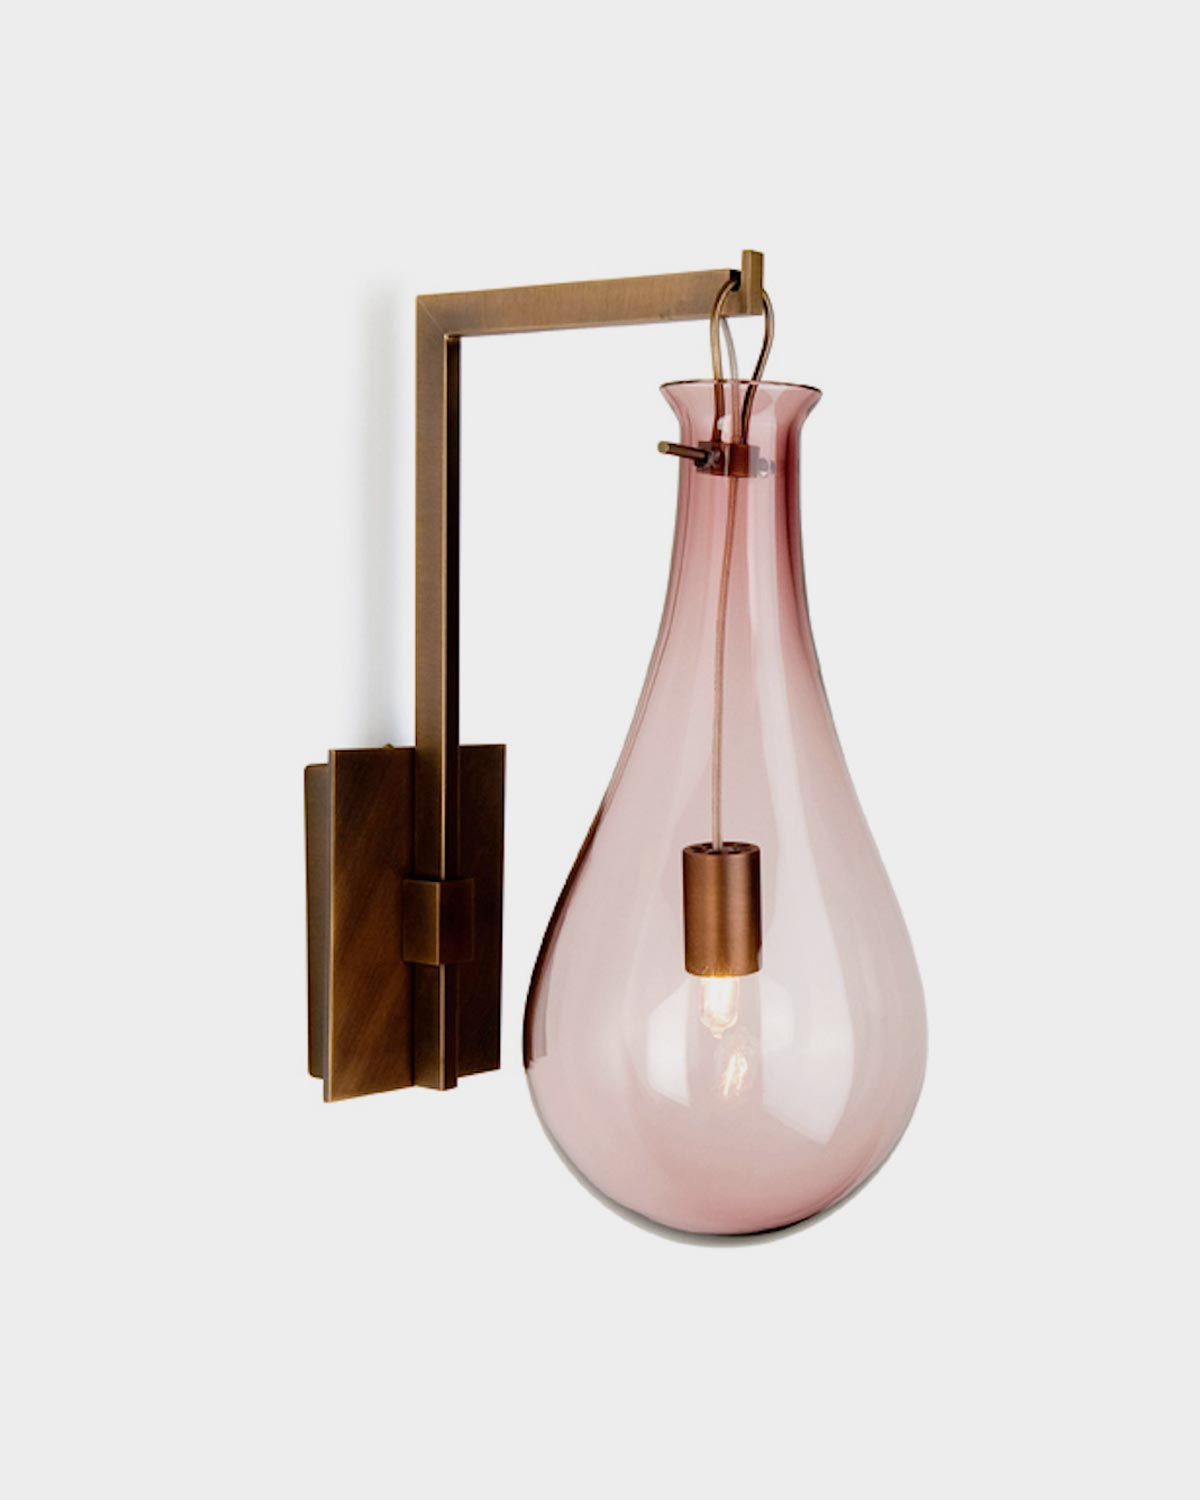 The Drop Wall Sconce by Veronese